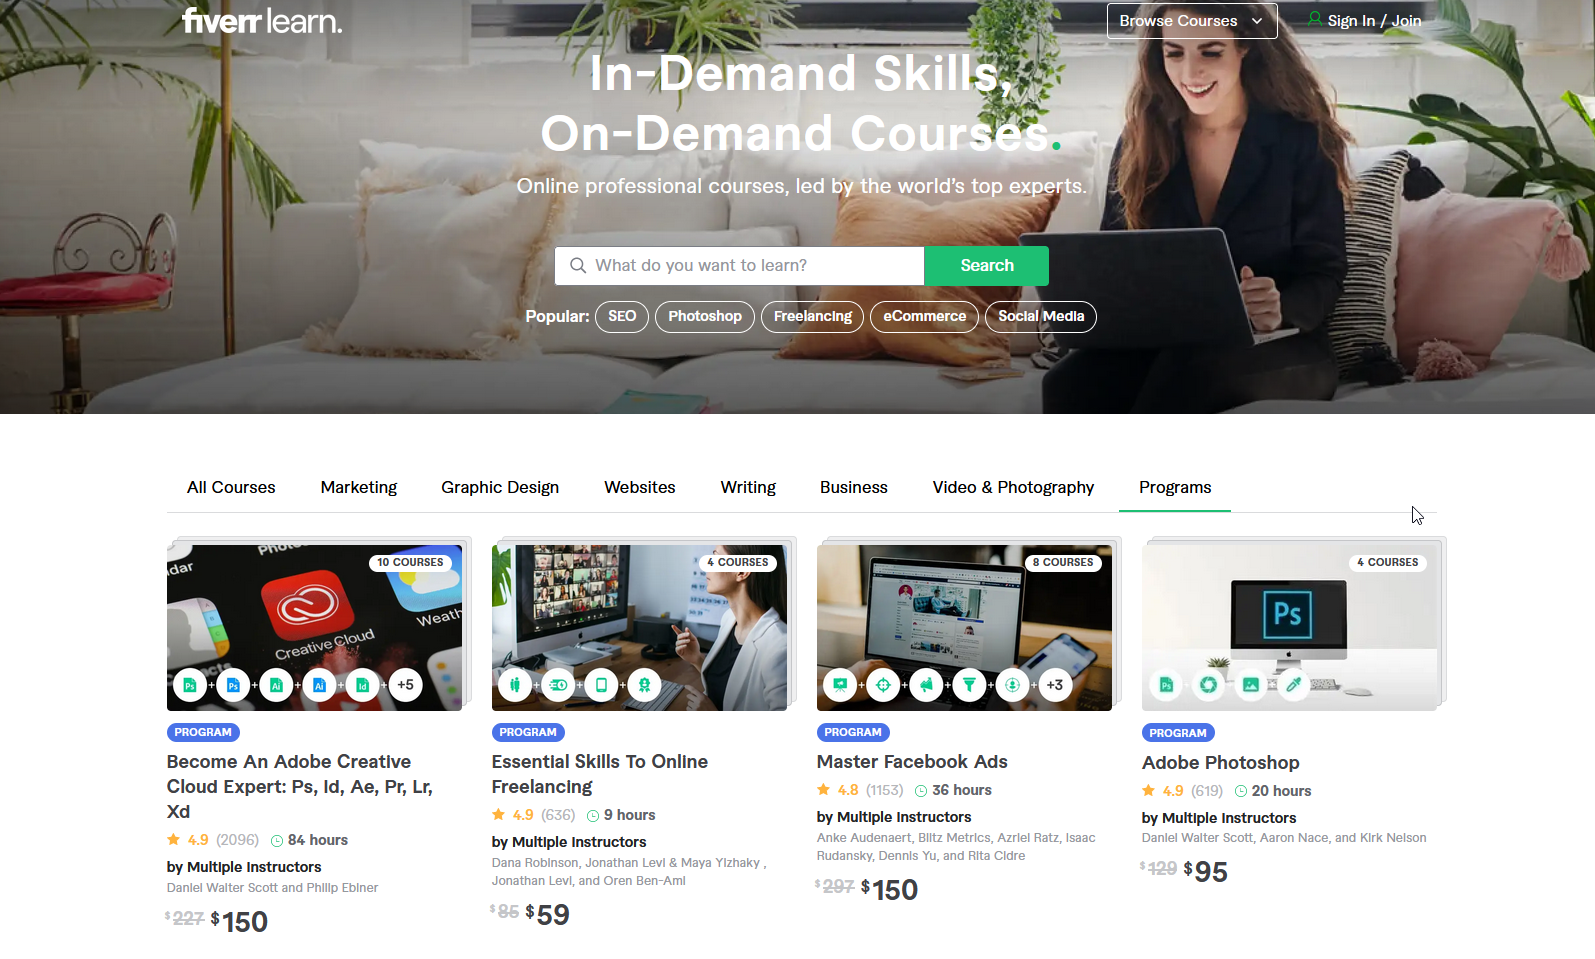 Online IT courses for beginners on Fiverr Heart.